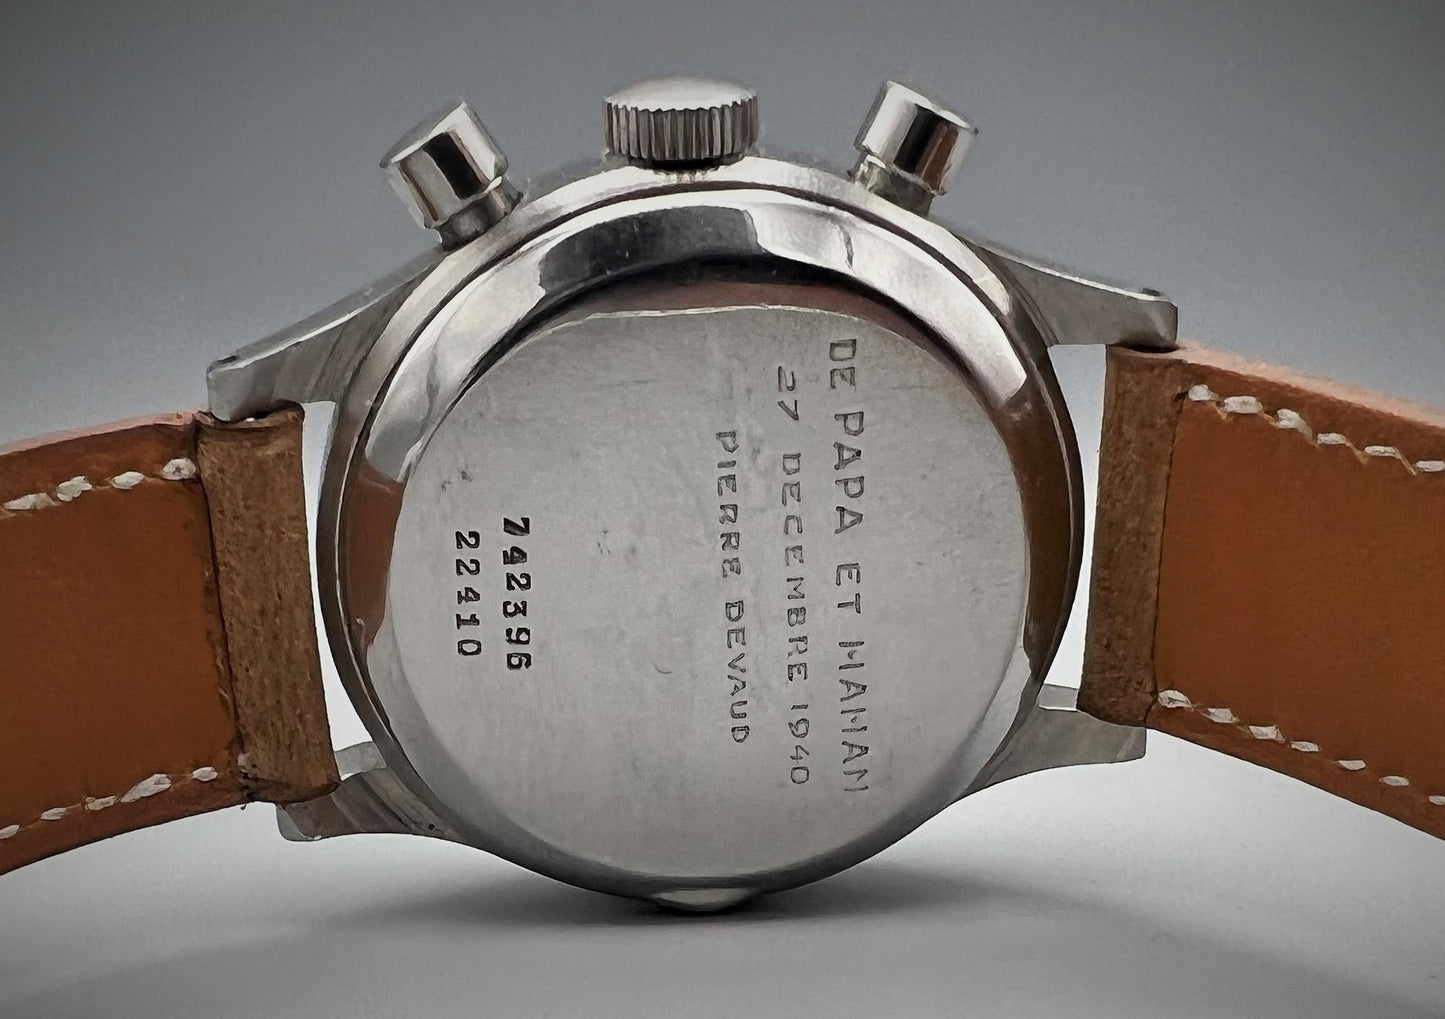 Universal Genève, Ref 22410, Large Stainless Steel Chronograph, 1940